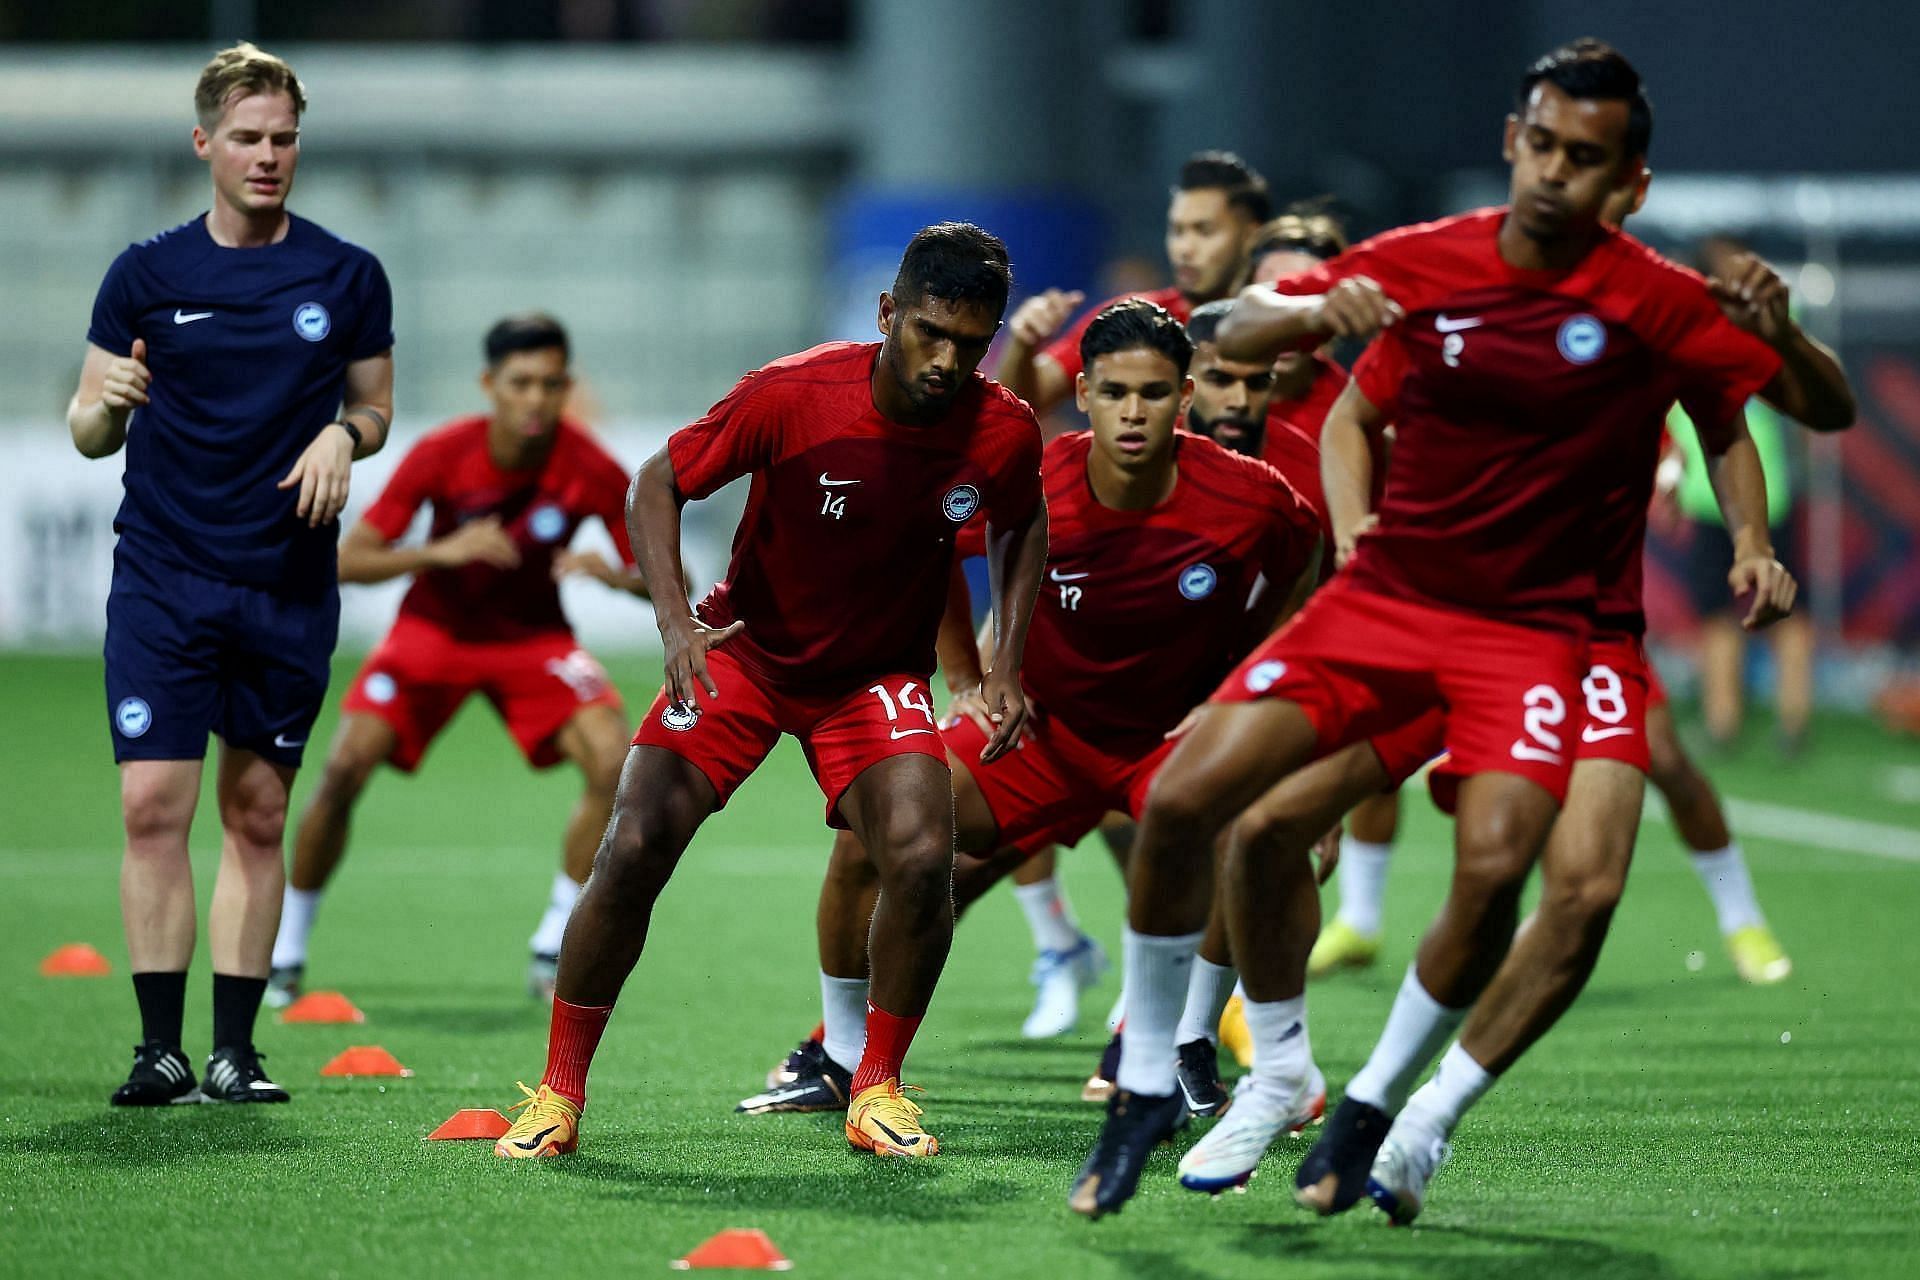 Singapore will face Guam on Thursday 